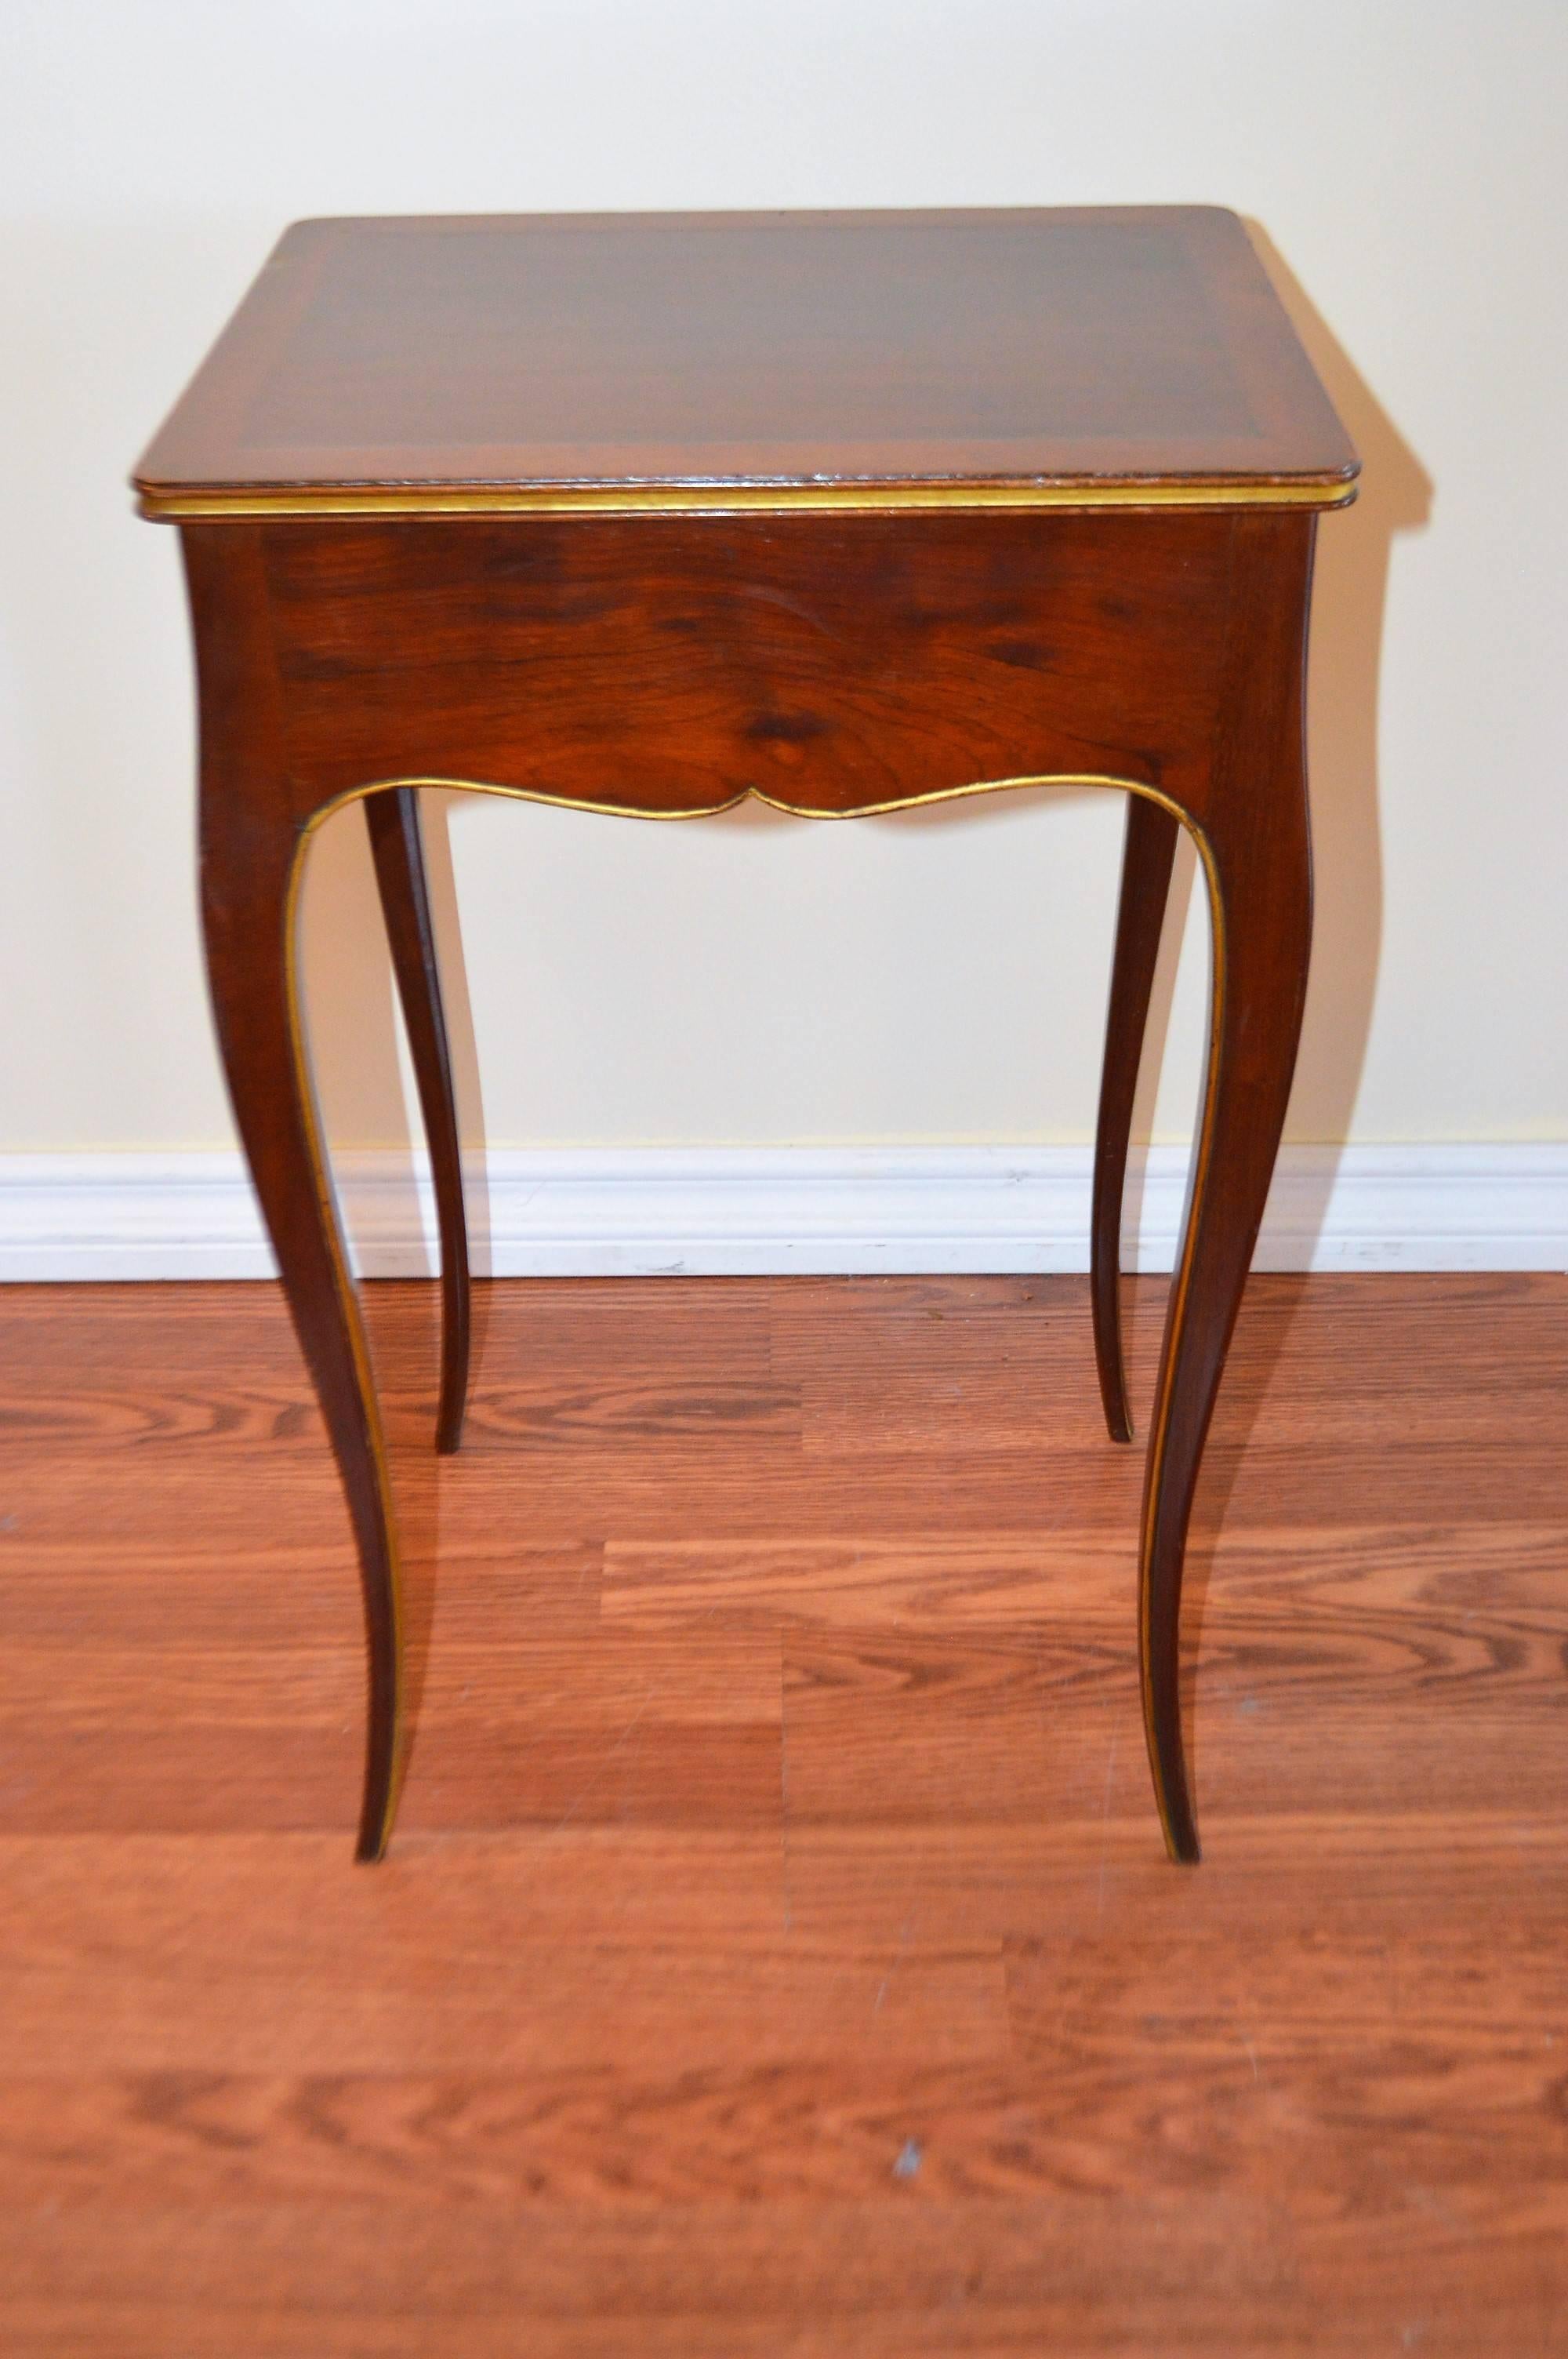 Pair of Elegant Mahogany Side Tables, Gilded Molding, Drawer and Pull-Out Table 1